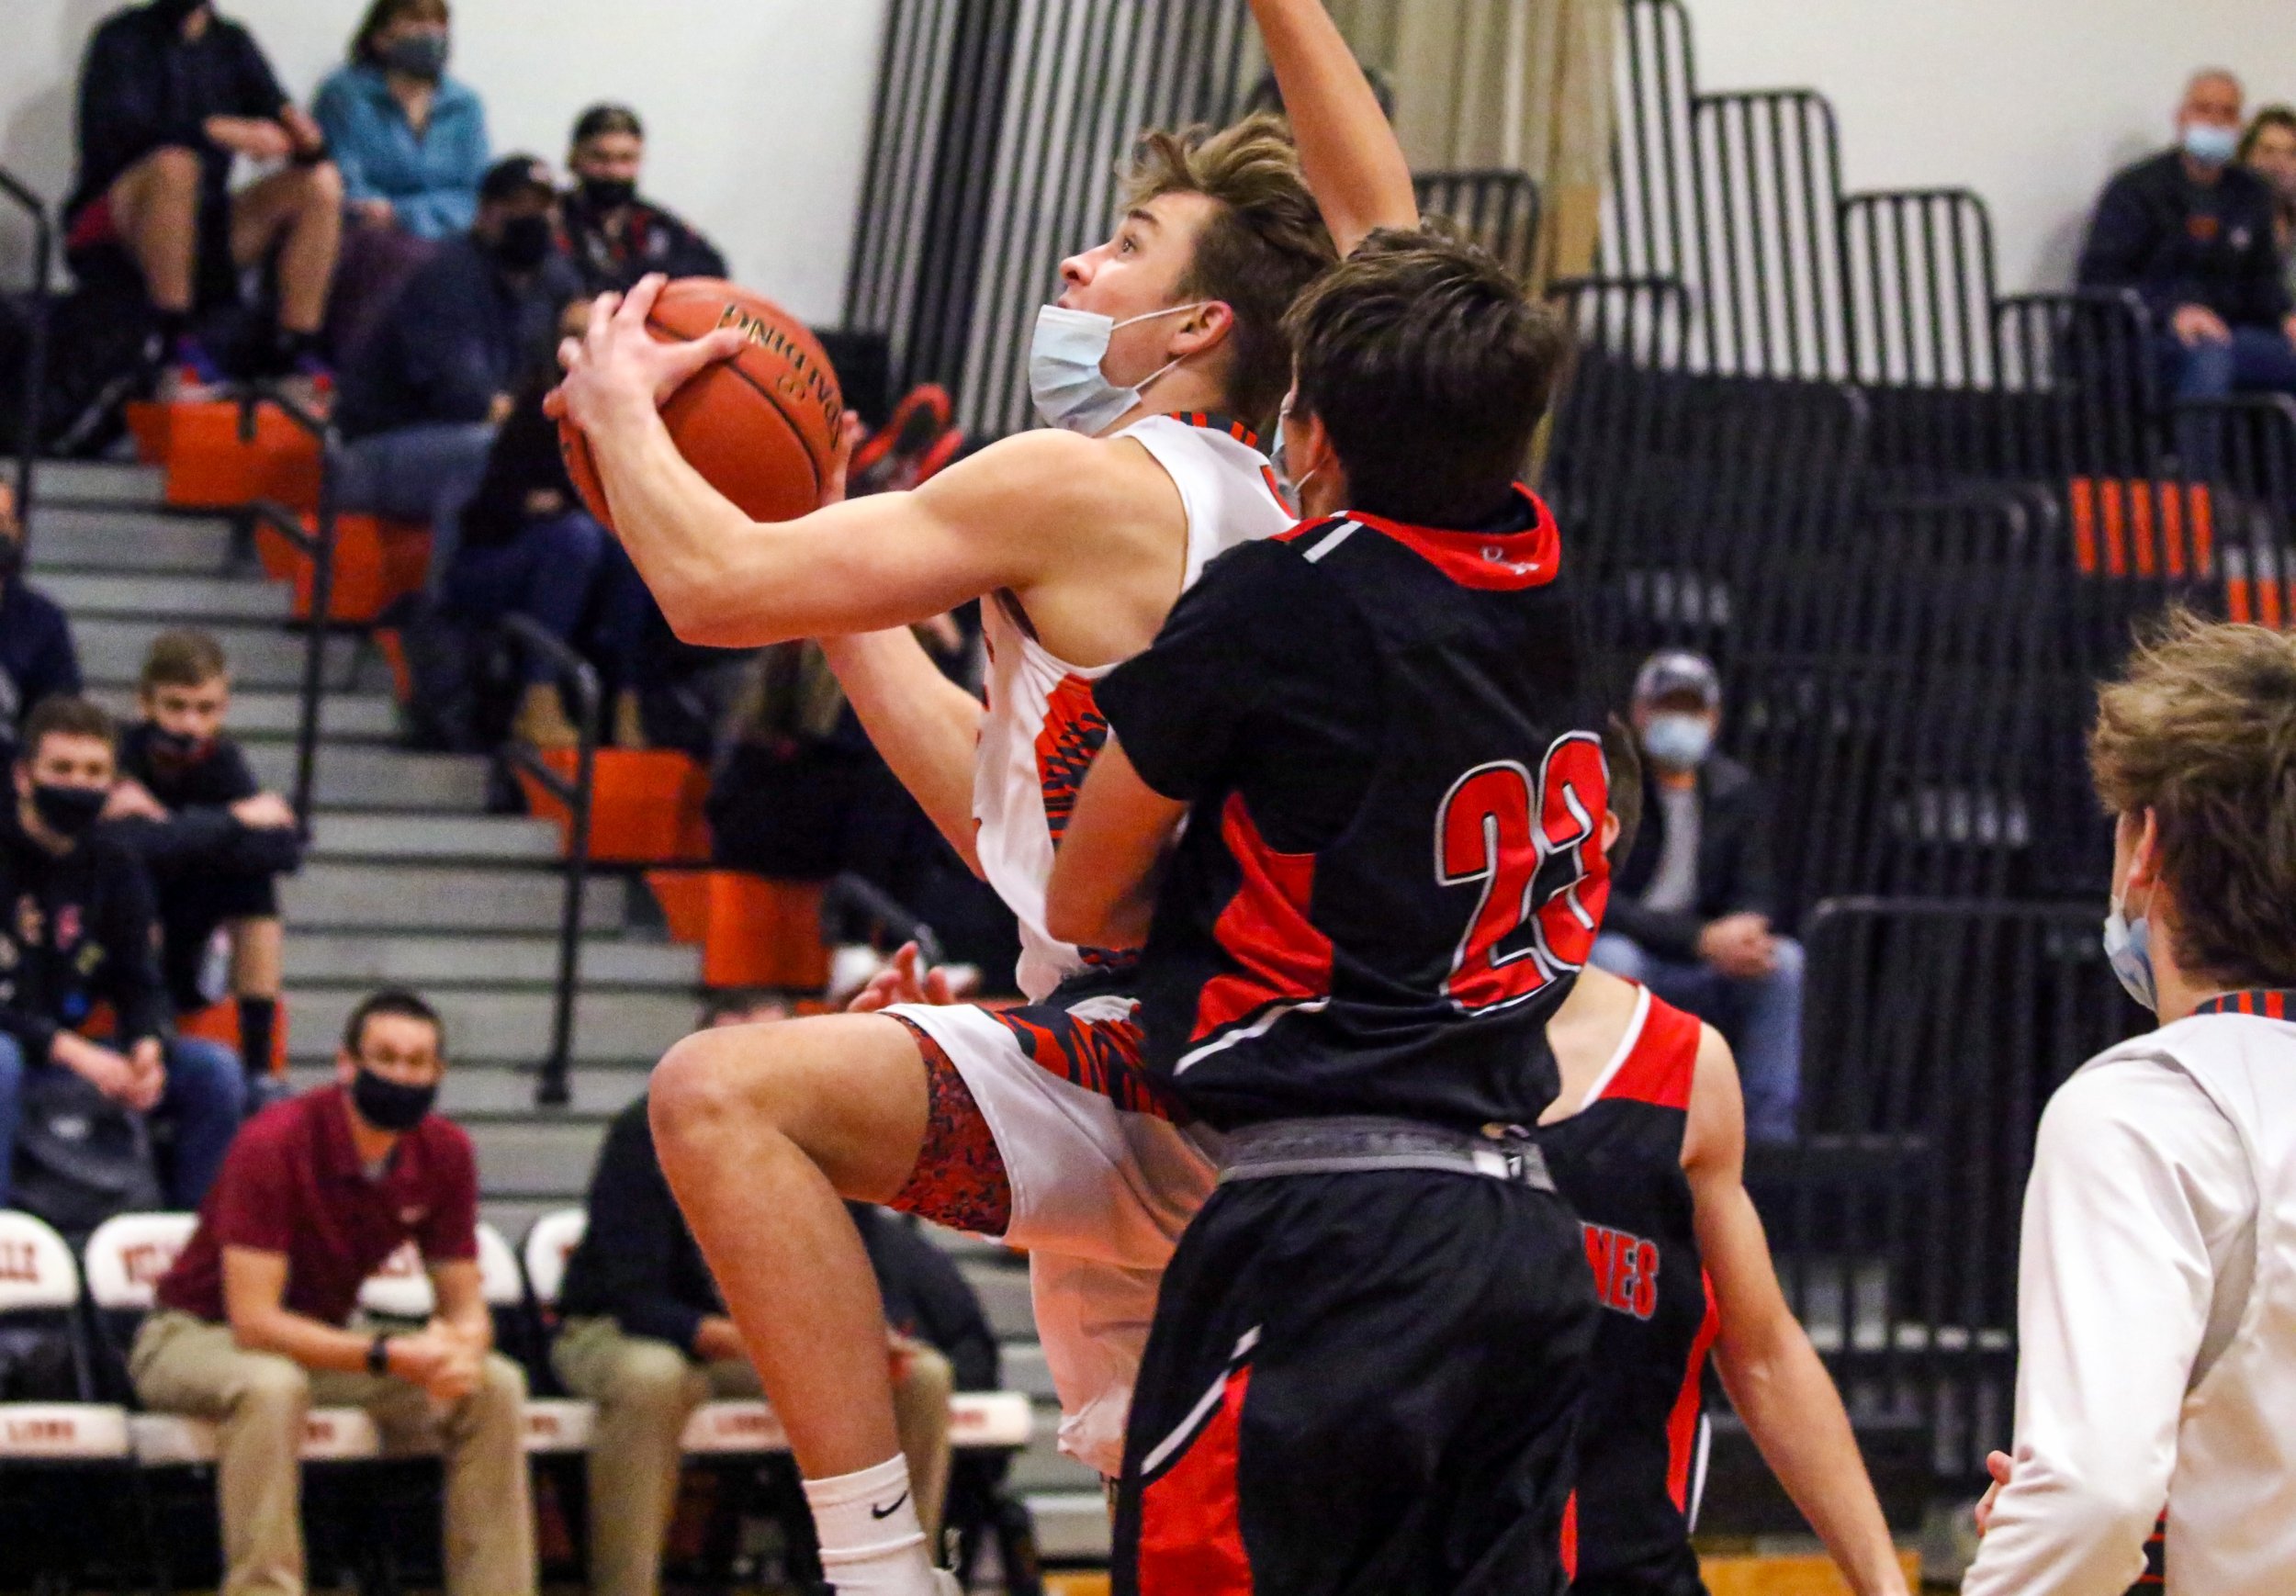  Wellsville senior Eli Schmidt, middle, goes up for the basket while under pressure from the defense of Bolivar-Richburg  junior Evan Pinney (23) during Tuesday night’s home contest in Wellsville. [Chris Brooks/WellsvilleSports.com] 